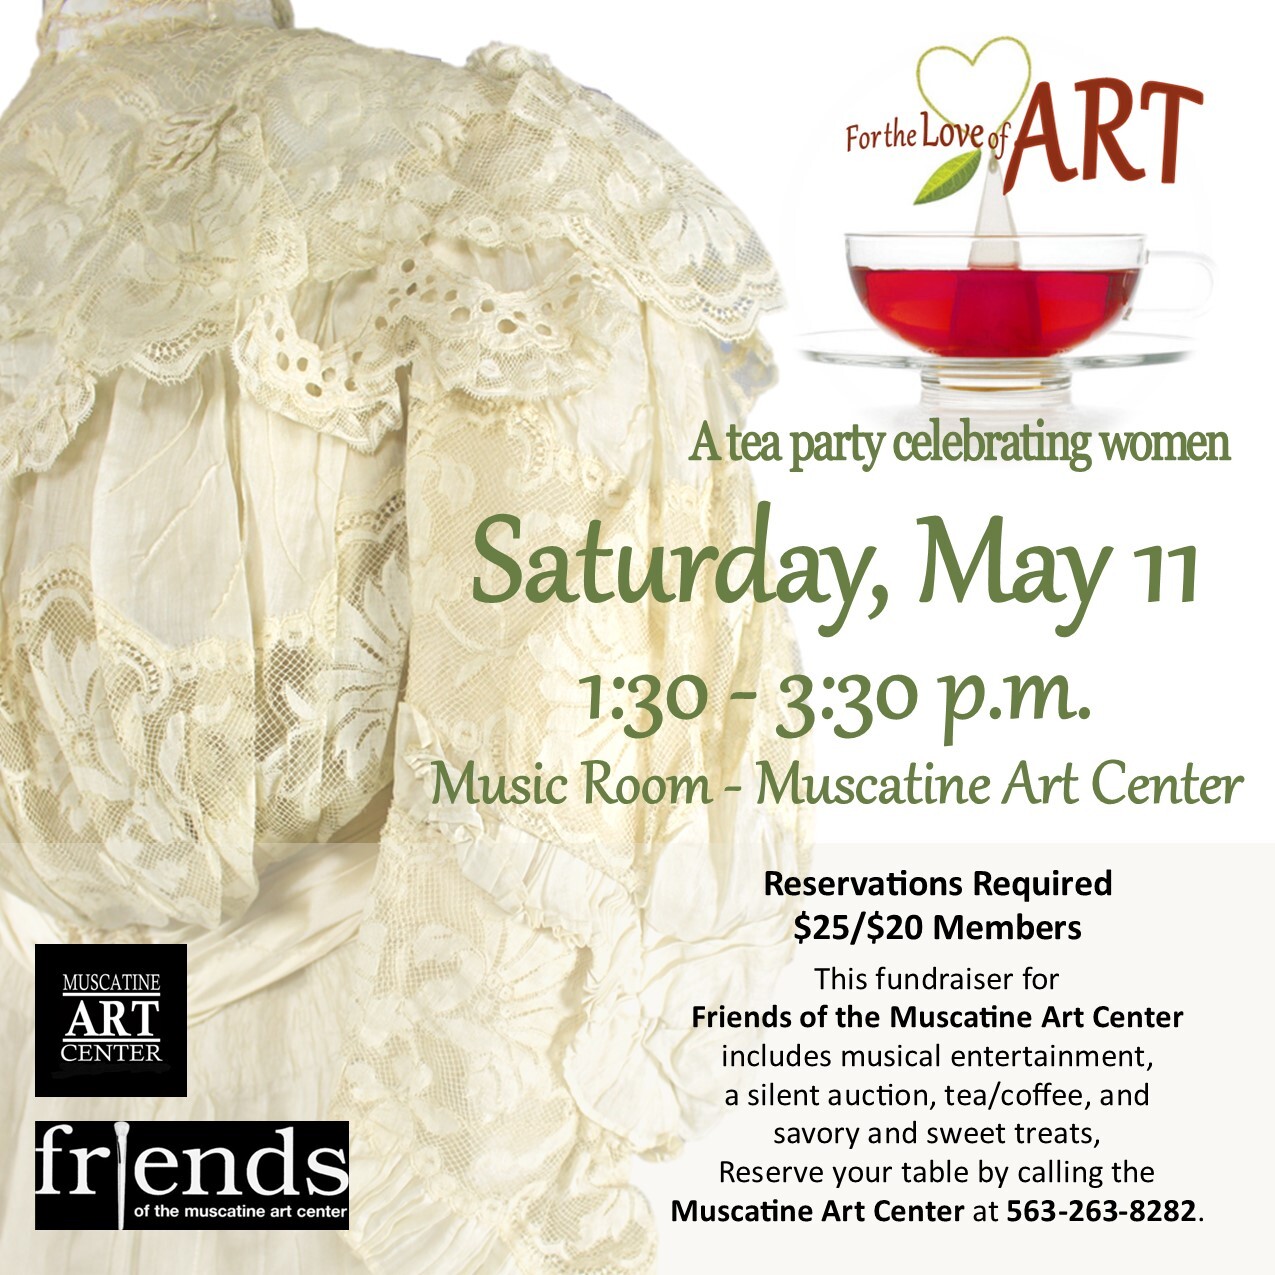 For the Love of Art - A tea party celebrating women Image